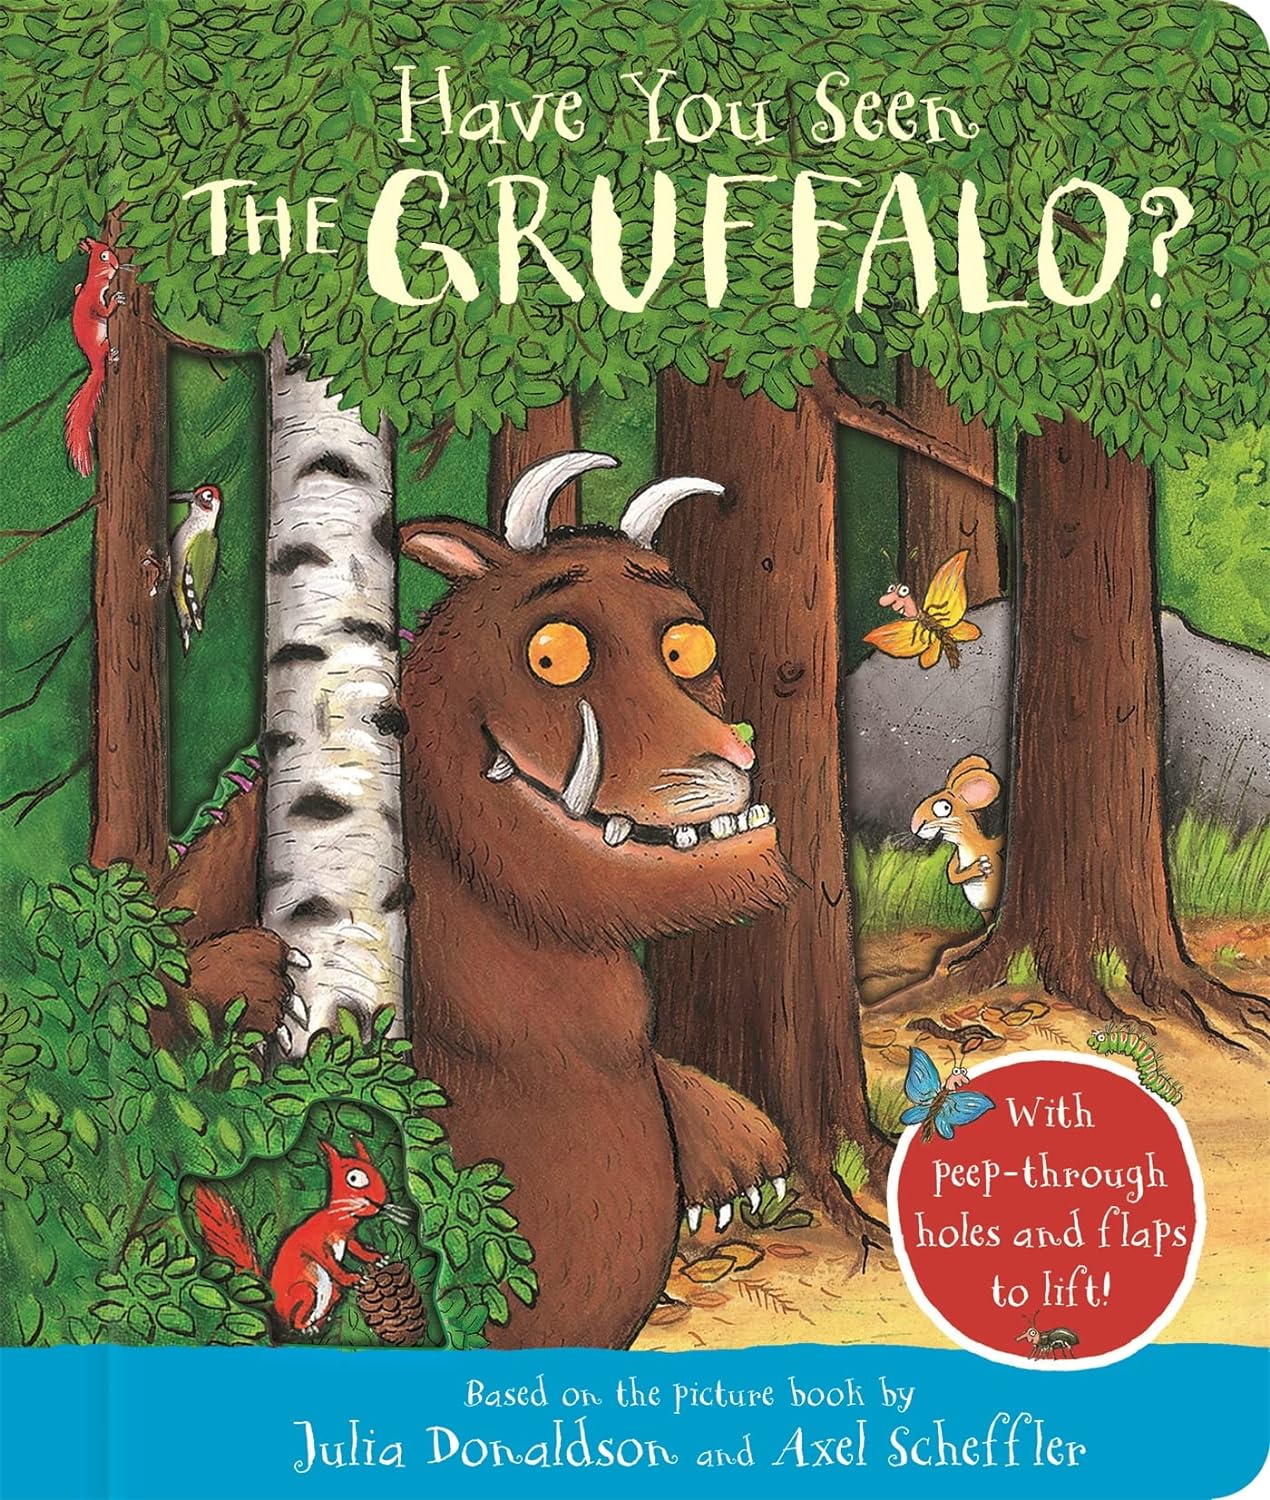 Have You Seen the Gruffalo?: With Peep-Through Holes and Flaps to Lift!